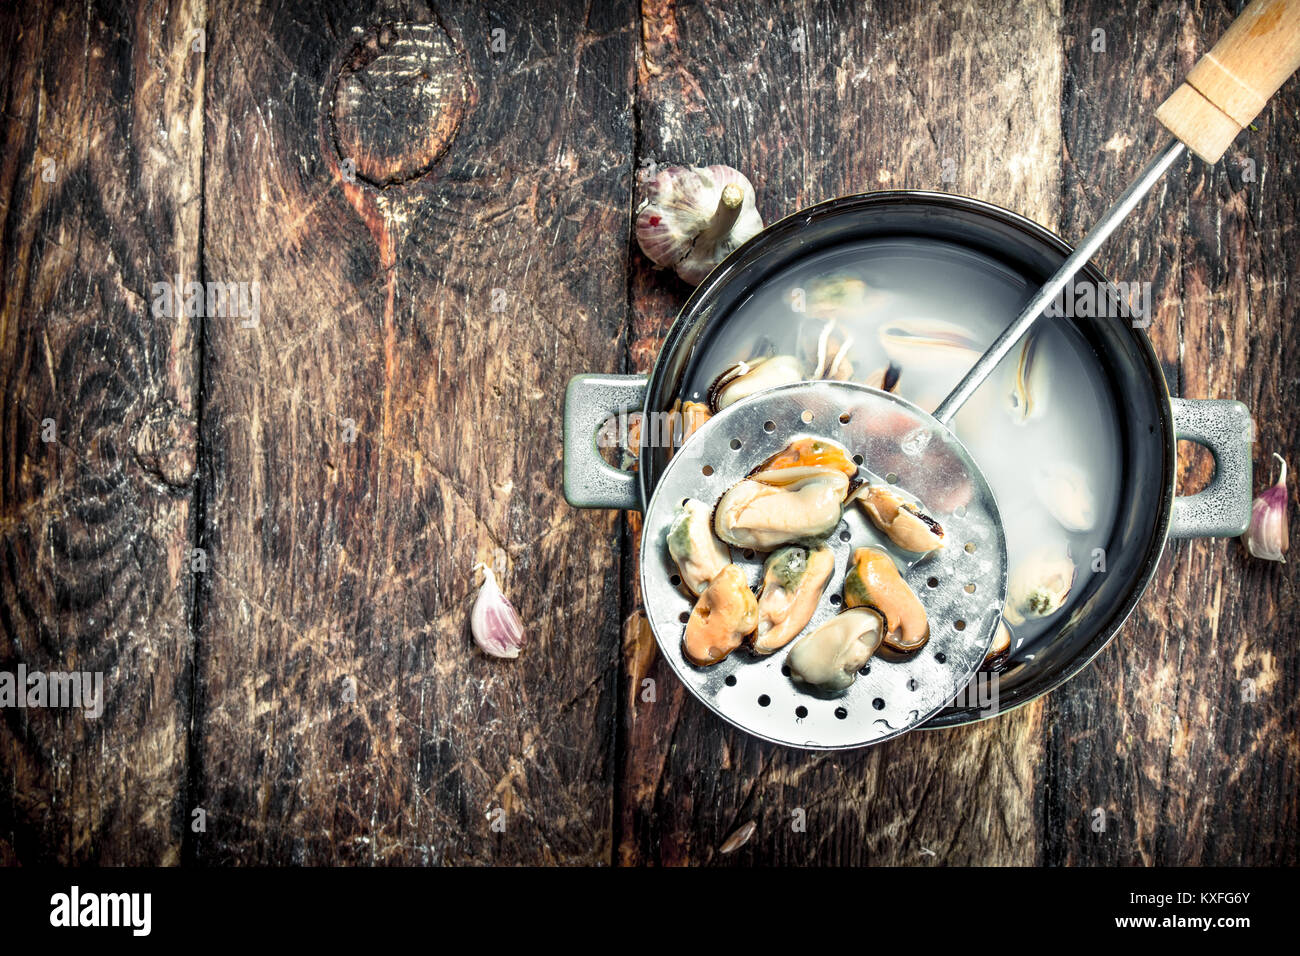 Boiled mussels in a bowl. On a wooden background. Stock Photo